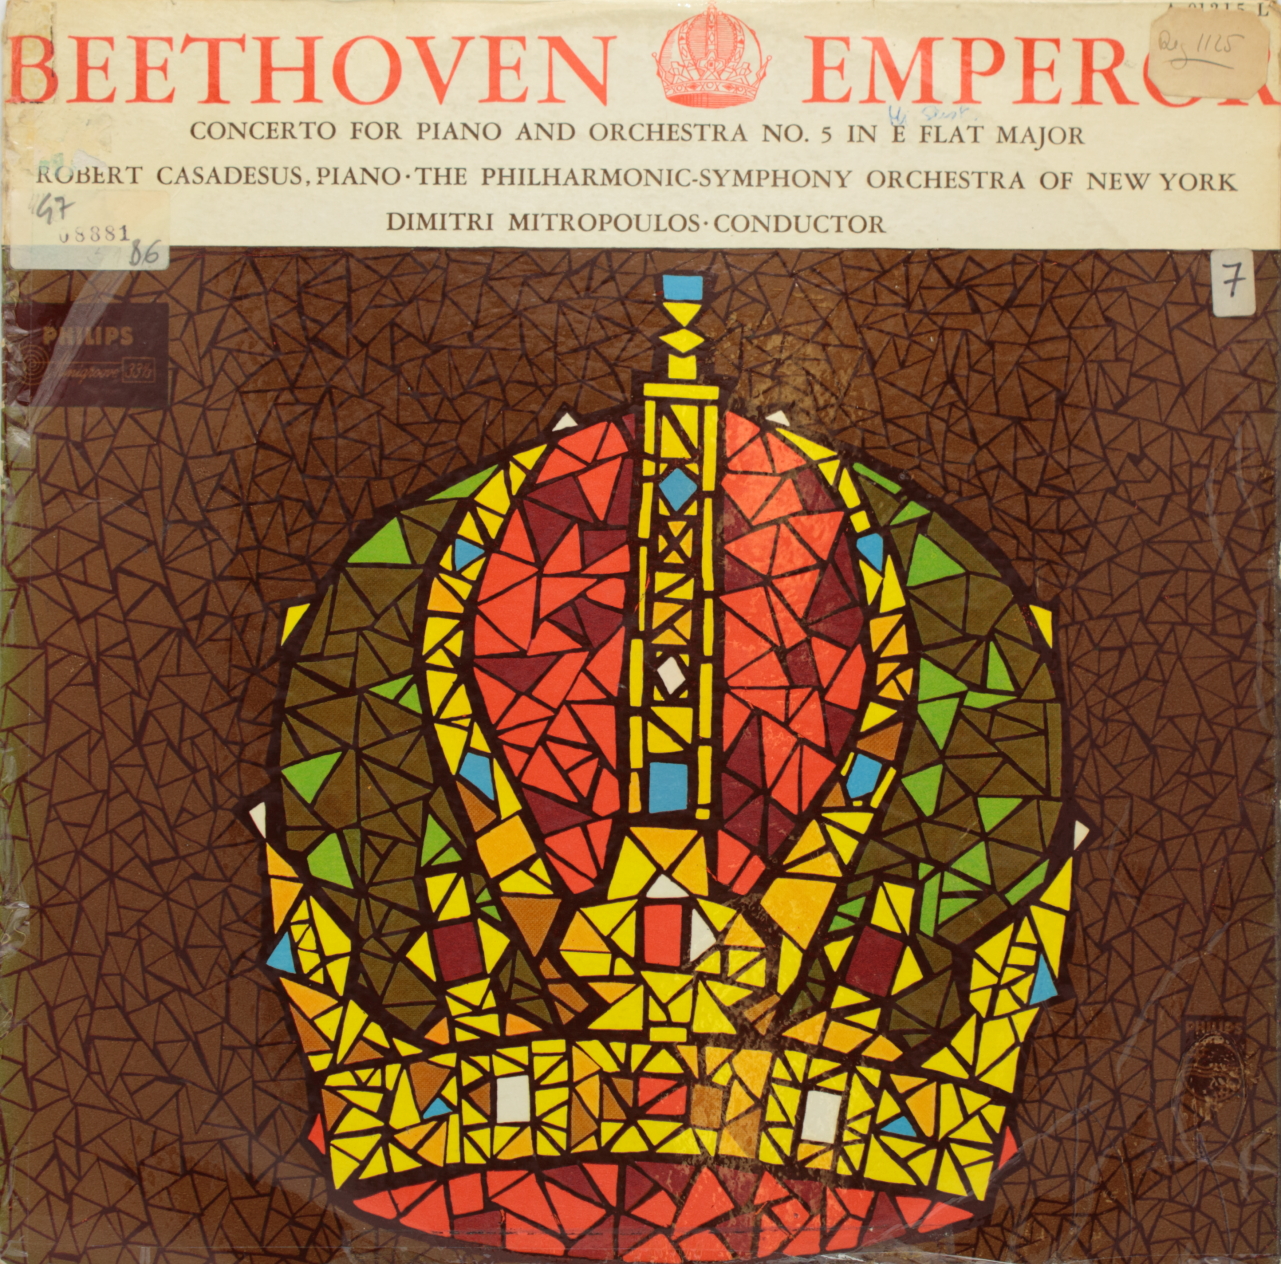 Beethoven: Concerto for Piano and Orchestra No. 5 in E Flat Major